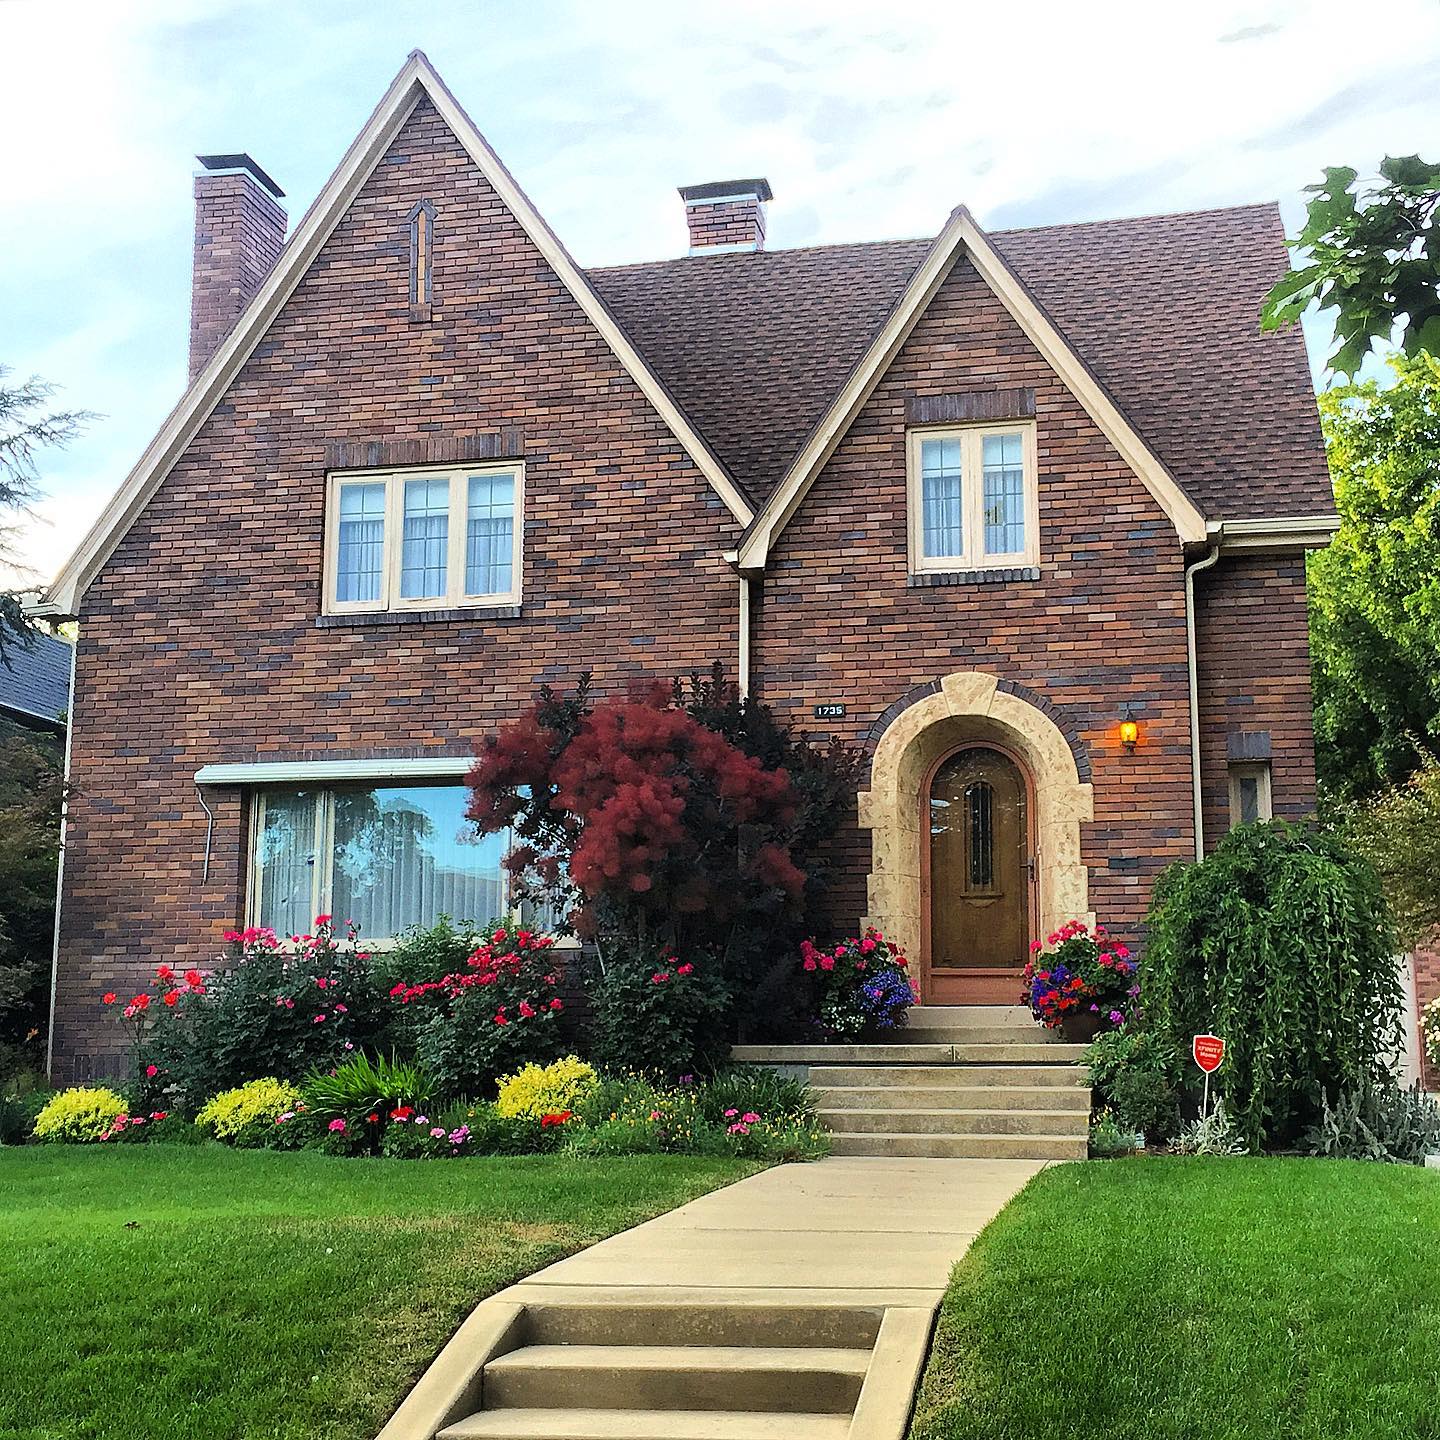 A brown brick tudor home with tan accents, a clean sidewalk and ard, and flowers blooming around the home. Photo via Instagram user @lovelyoldhomes